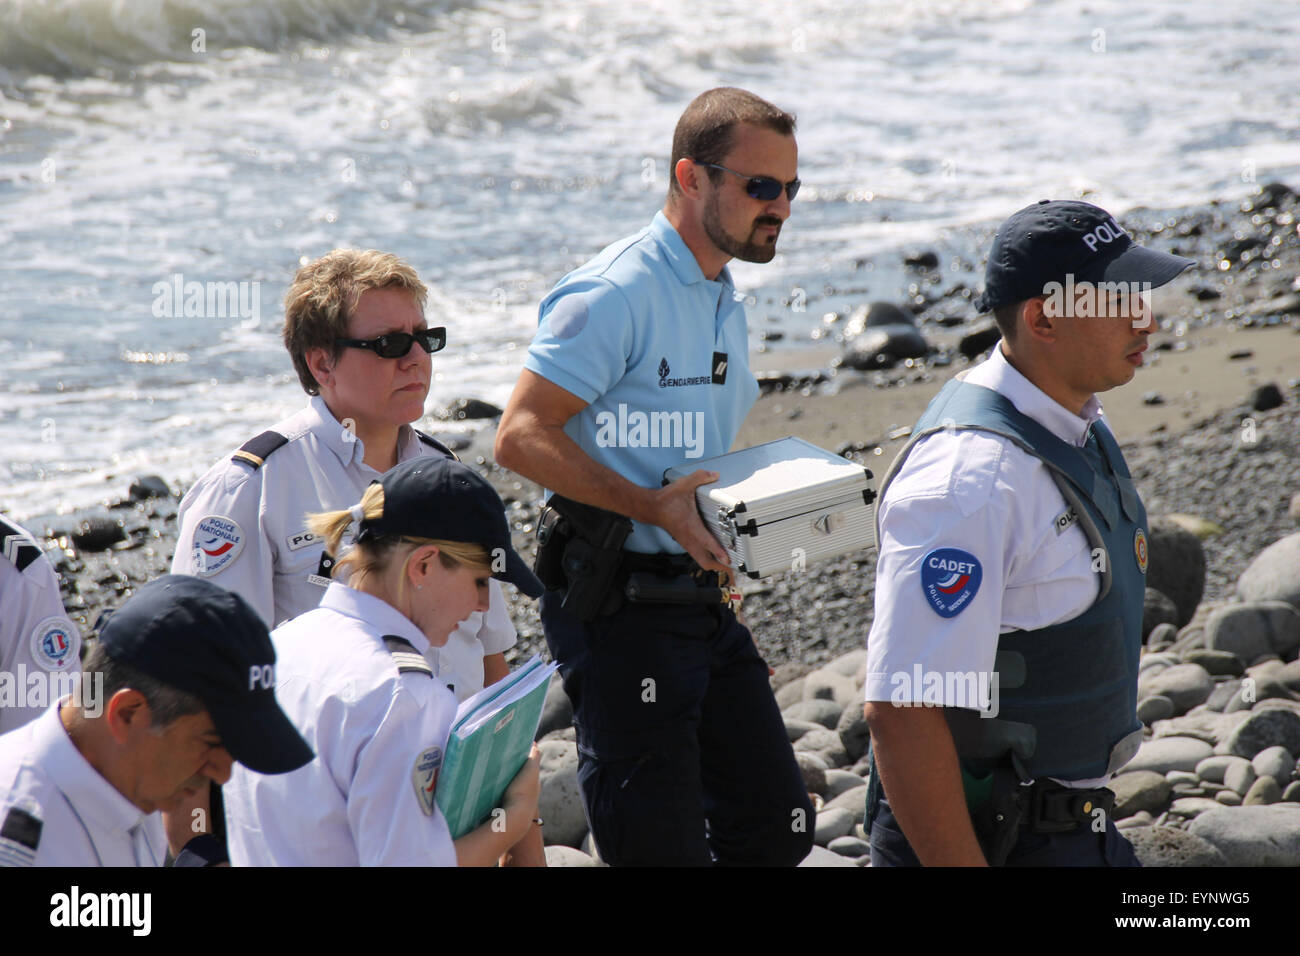 Saint Denis, Reunion. Aug. 2, 2015. Police officers leave the beach with a container holding metallic debris found on the island. A piece of metal was found on a beach near Saint-Denis. The flaperon discovered on Reunion Island has been officially identified as being part of a Boeing 777 aircraft, the same type of plane of the missing flight of Malaysia Airlines MH370. Credit:  Xinhua/Alamy Live News Stock Photo